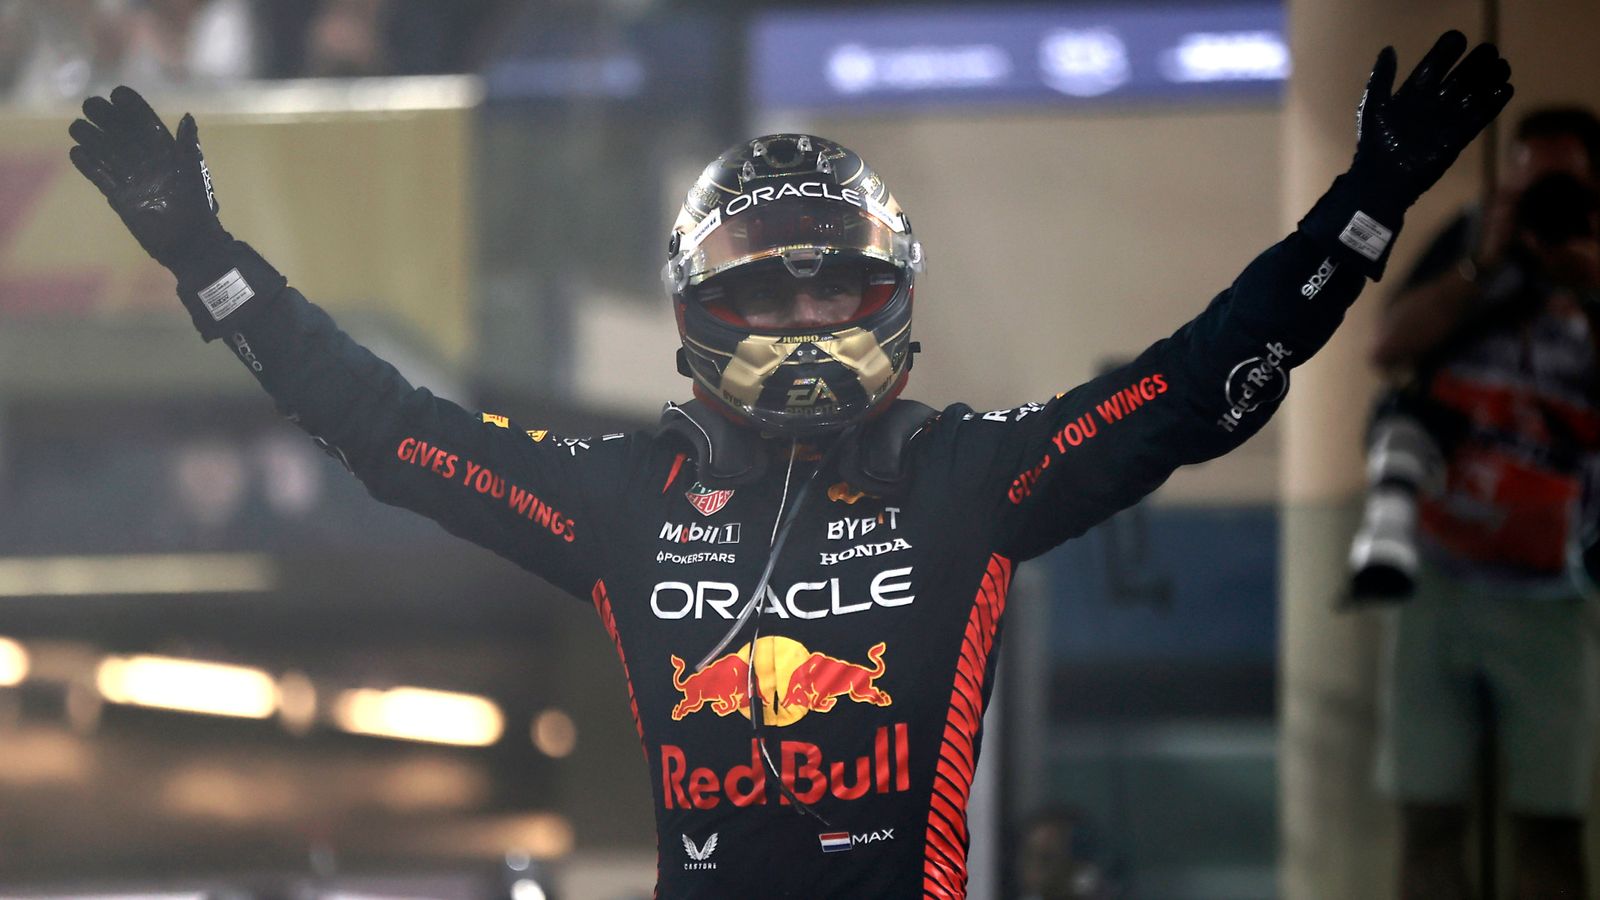 Abu Dhabi GP: Max Verstappen claims record-extending win as Mercedes hold off Ferrari in constructors battle